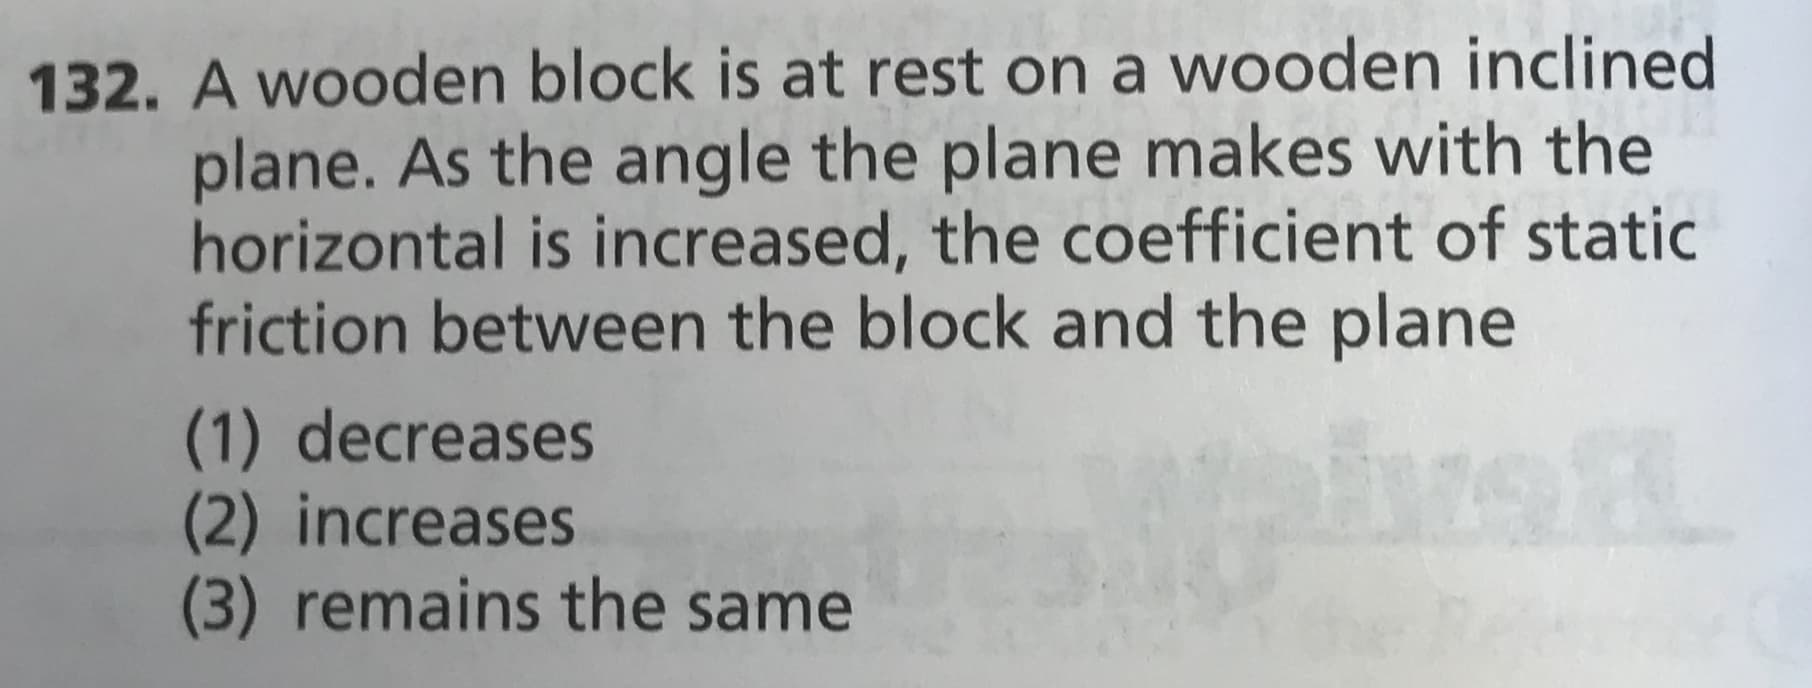 132. A wooden block is at rest on a wooden inclined
plane. As the angle the plane makes with the
horizontal is increased, the coefficient of static
friction between the block and the plane
(1) decreases
(2) increases
(3) remains the same
16
